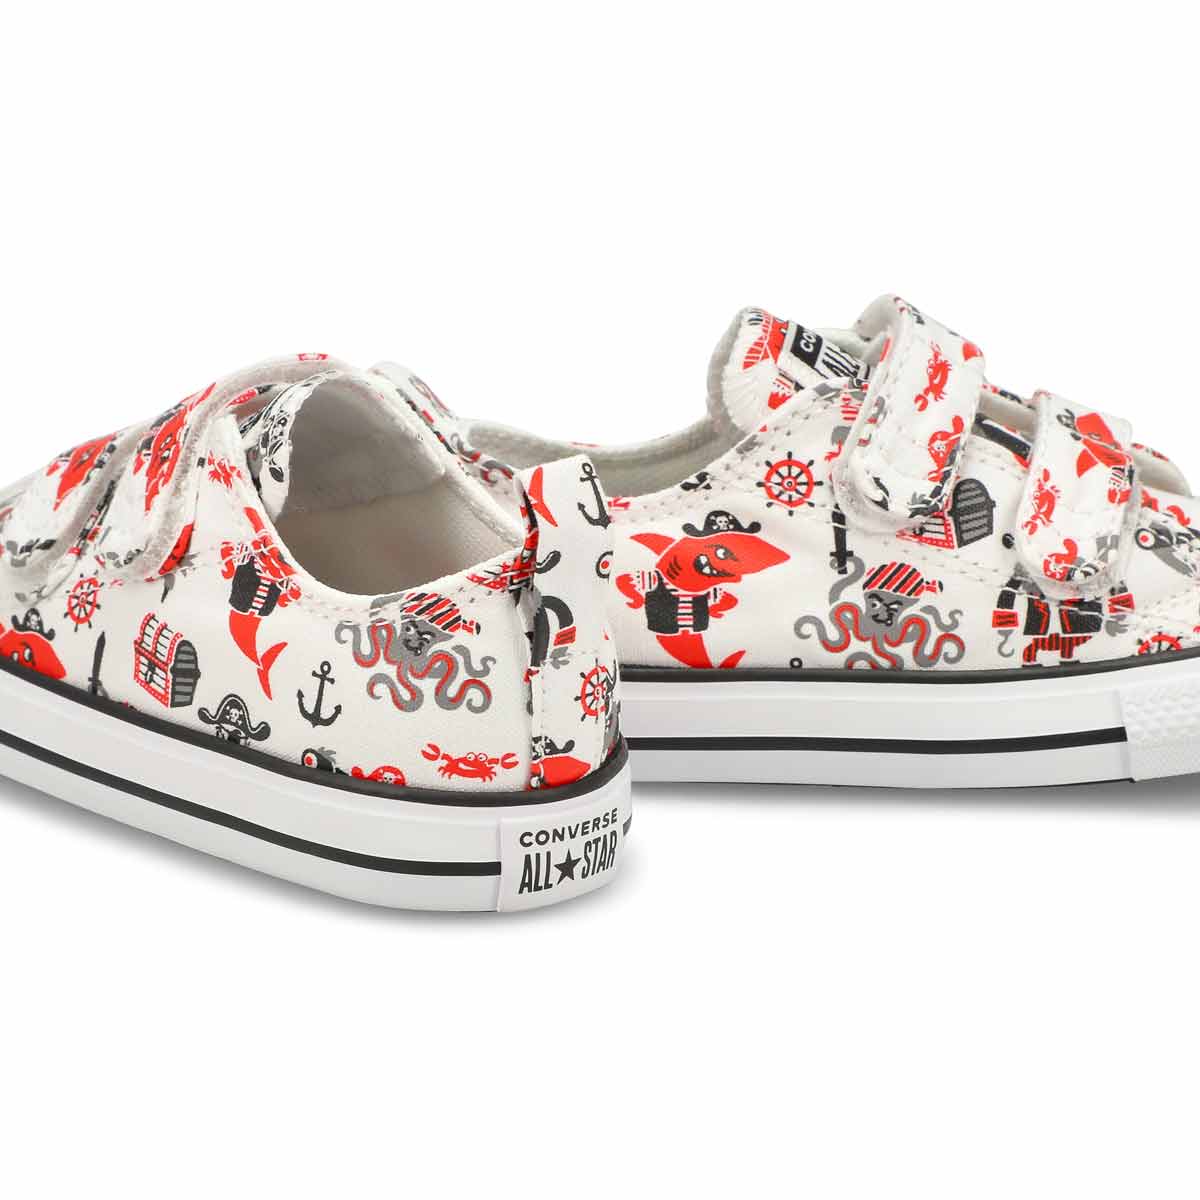 Infants' Chuck Taylor All Star Pirates Cove Sneaker - White/Red/Black